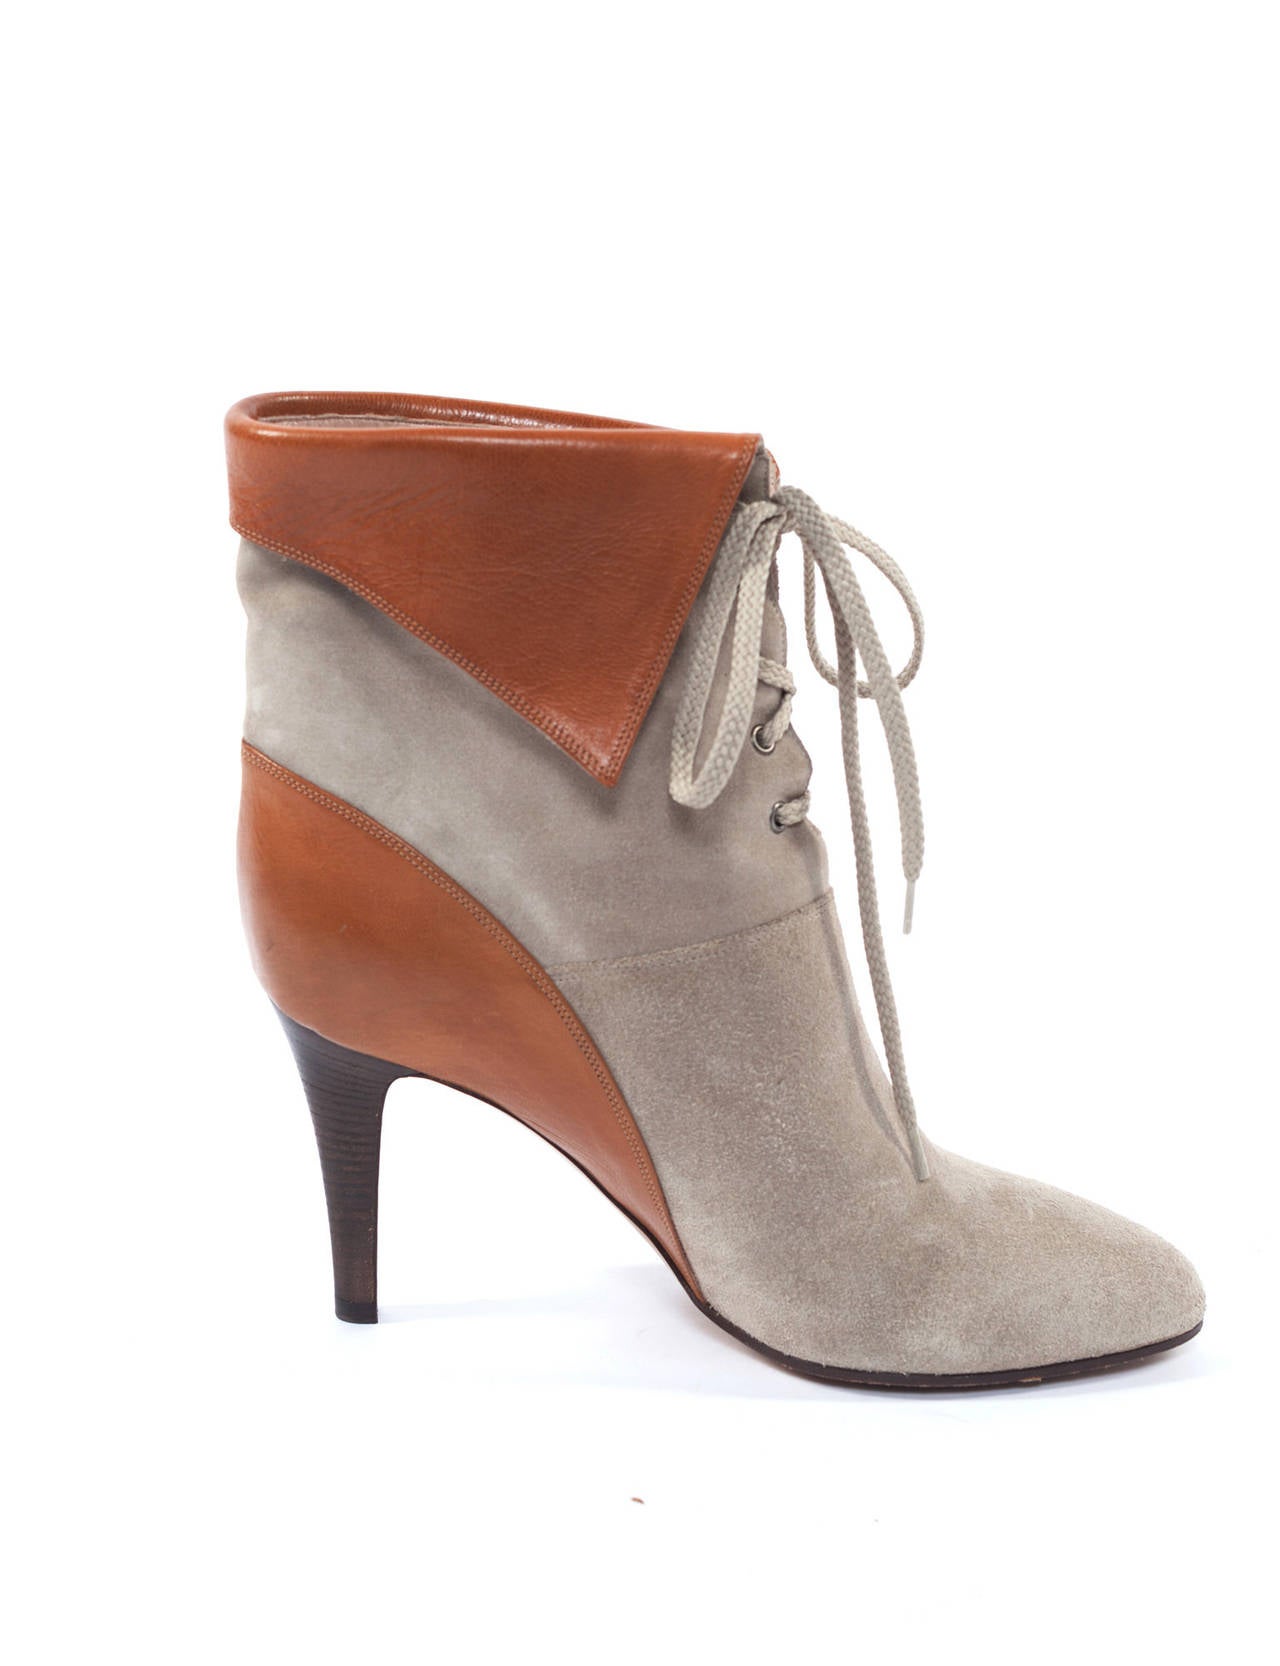 Women's Chloe by Hannah Gibbon Catlyn Suede and leather booties fall 2009, Sz. 8